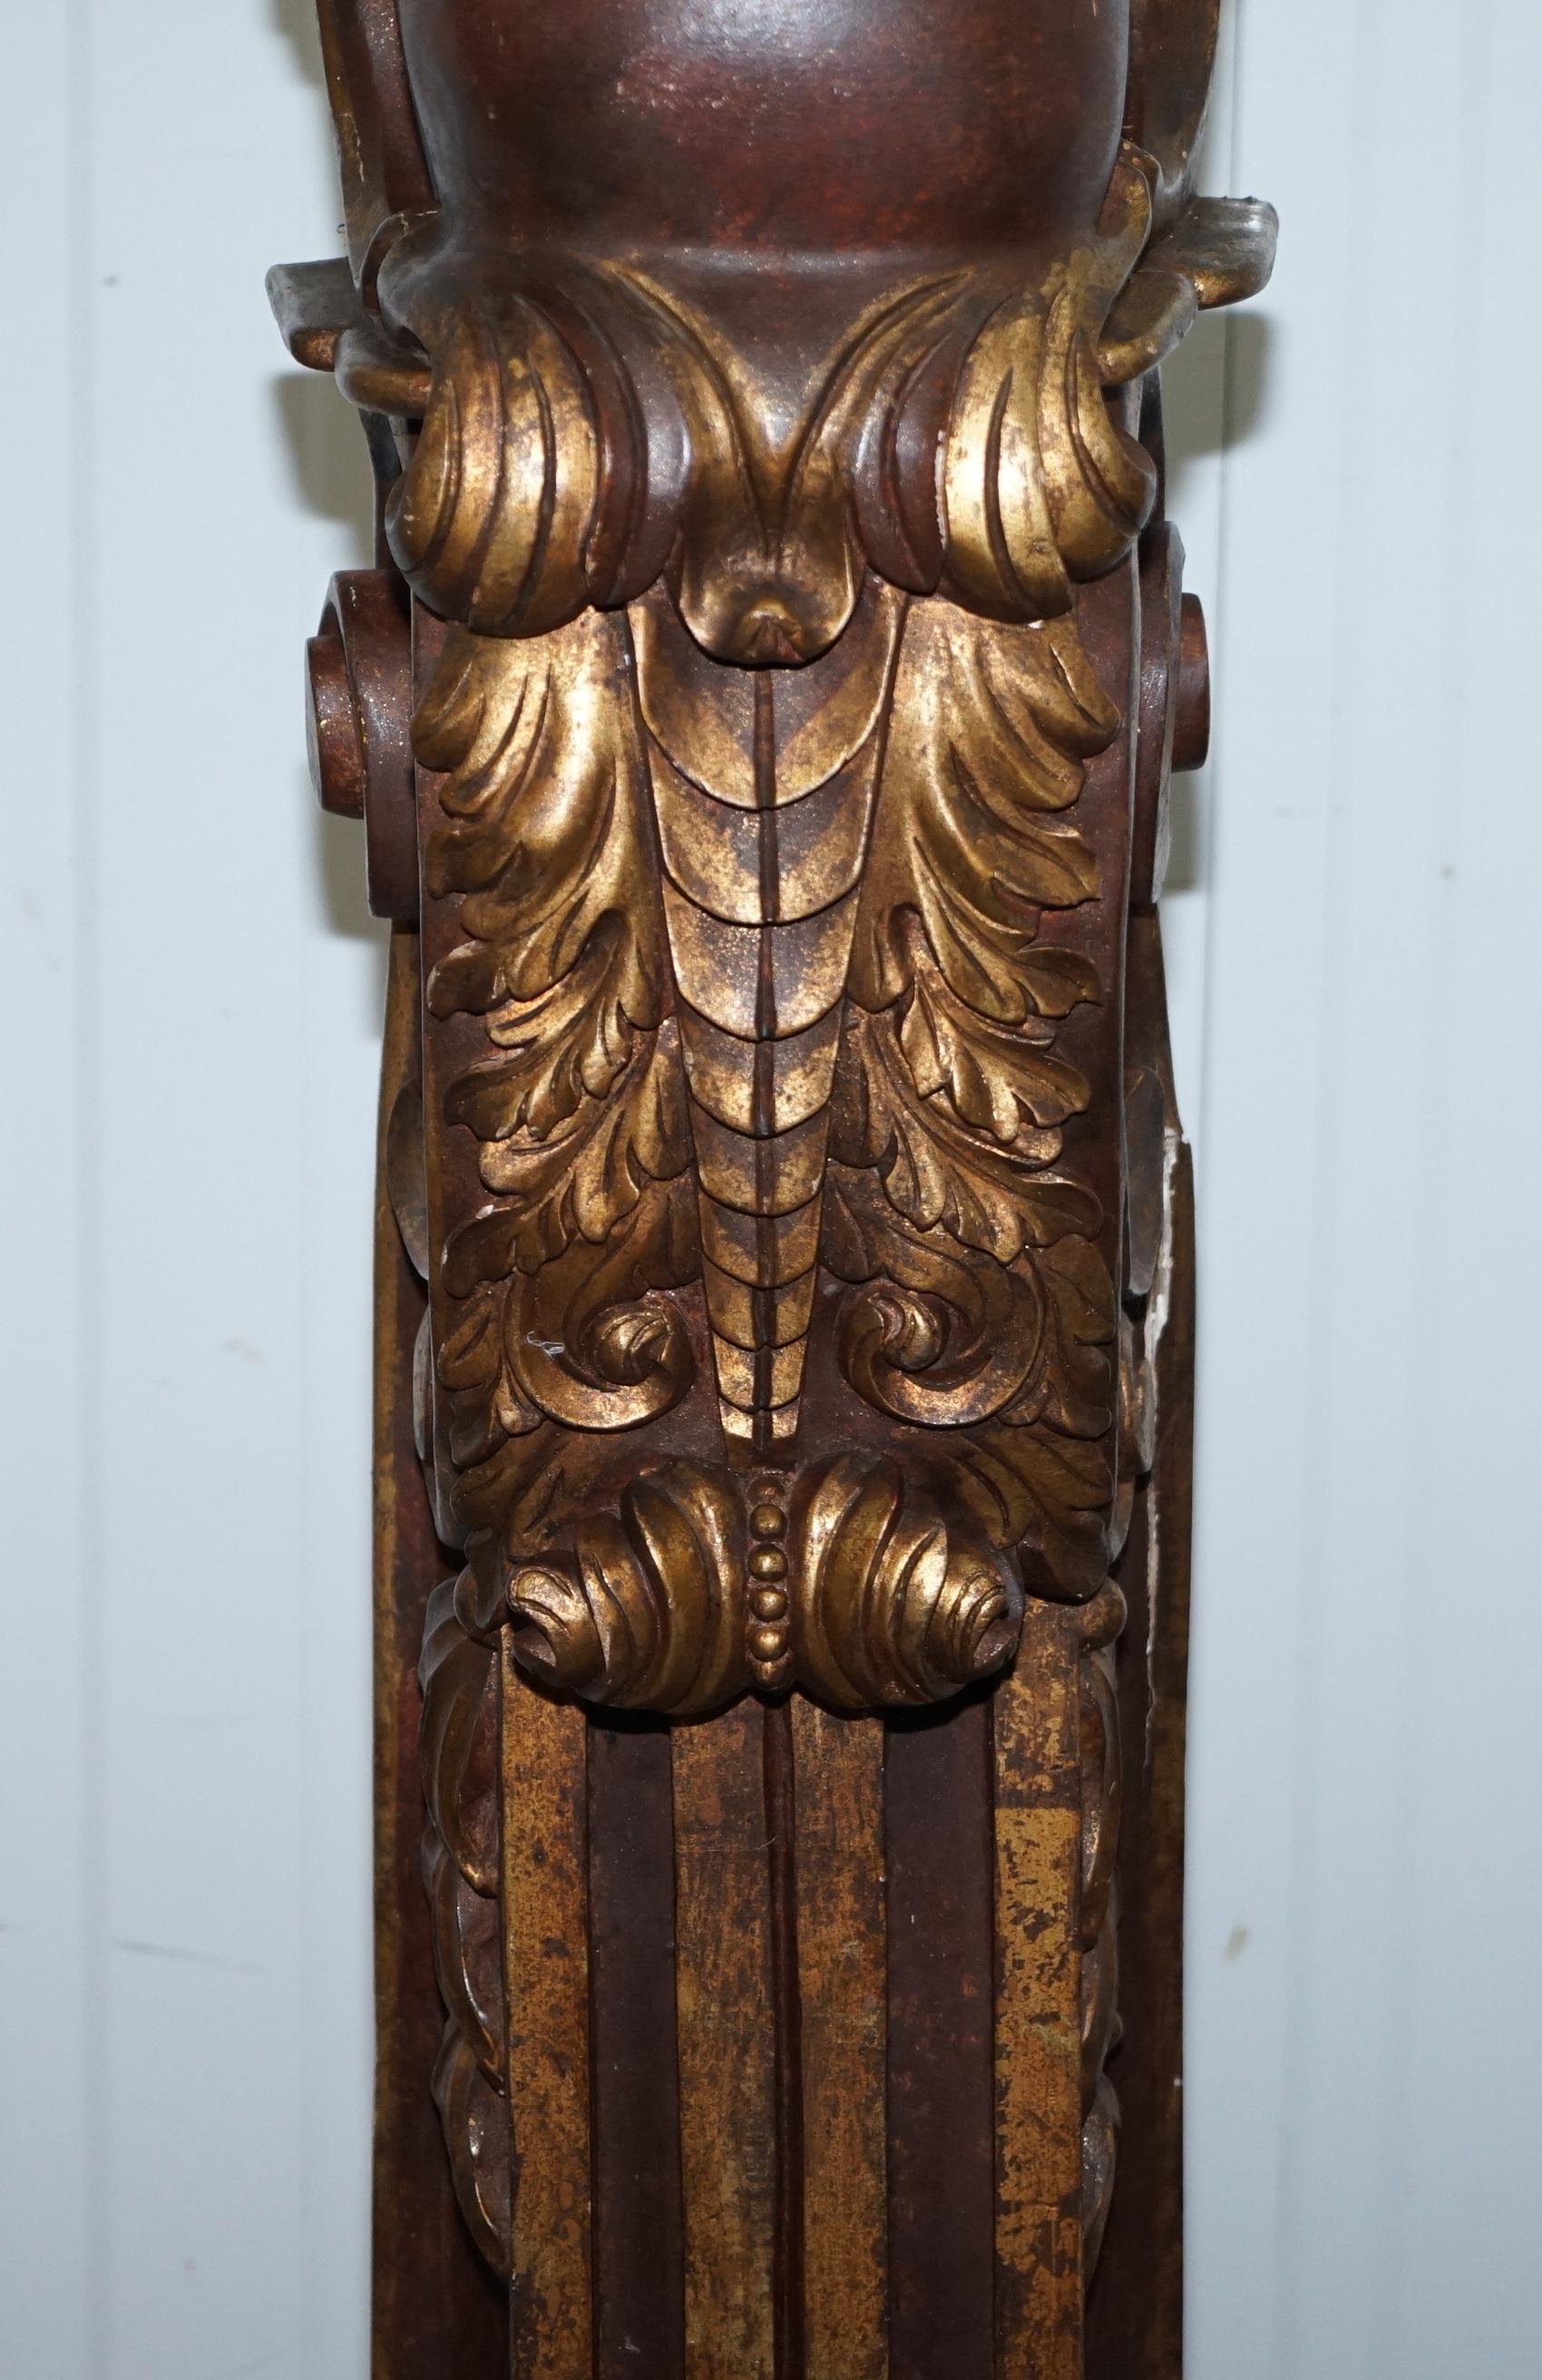 Hand-Crafted Pair of Old Ship Style Pillars Column Pedestals Jardinière Stands Carved Wood